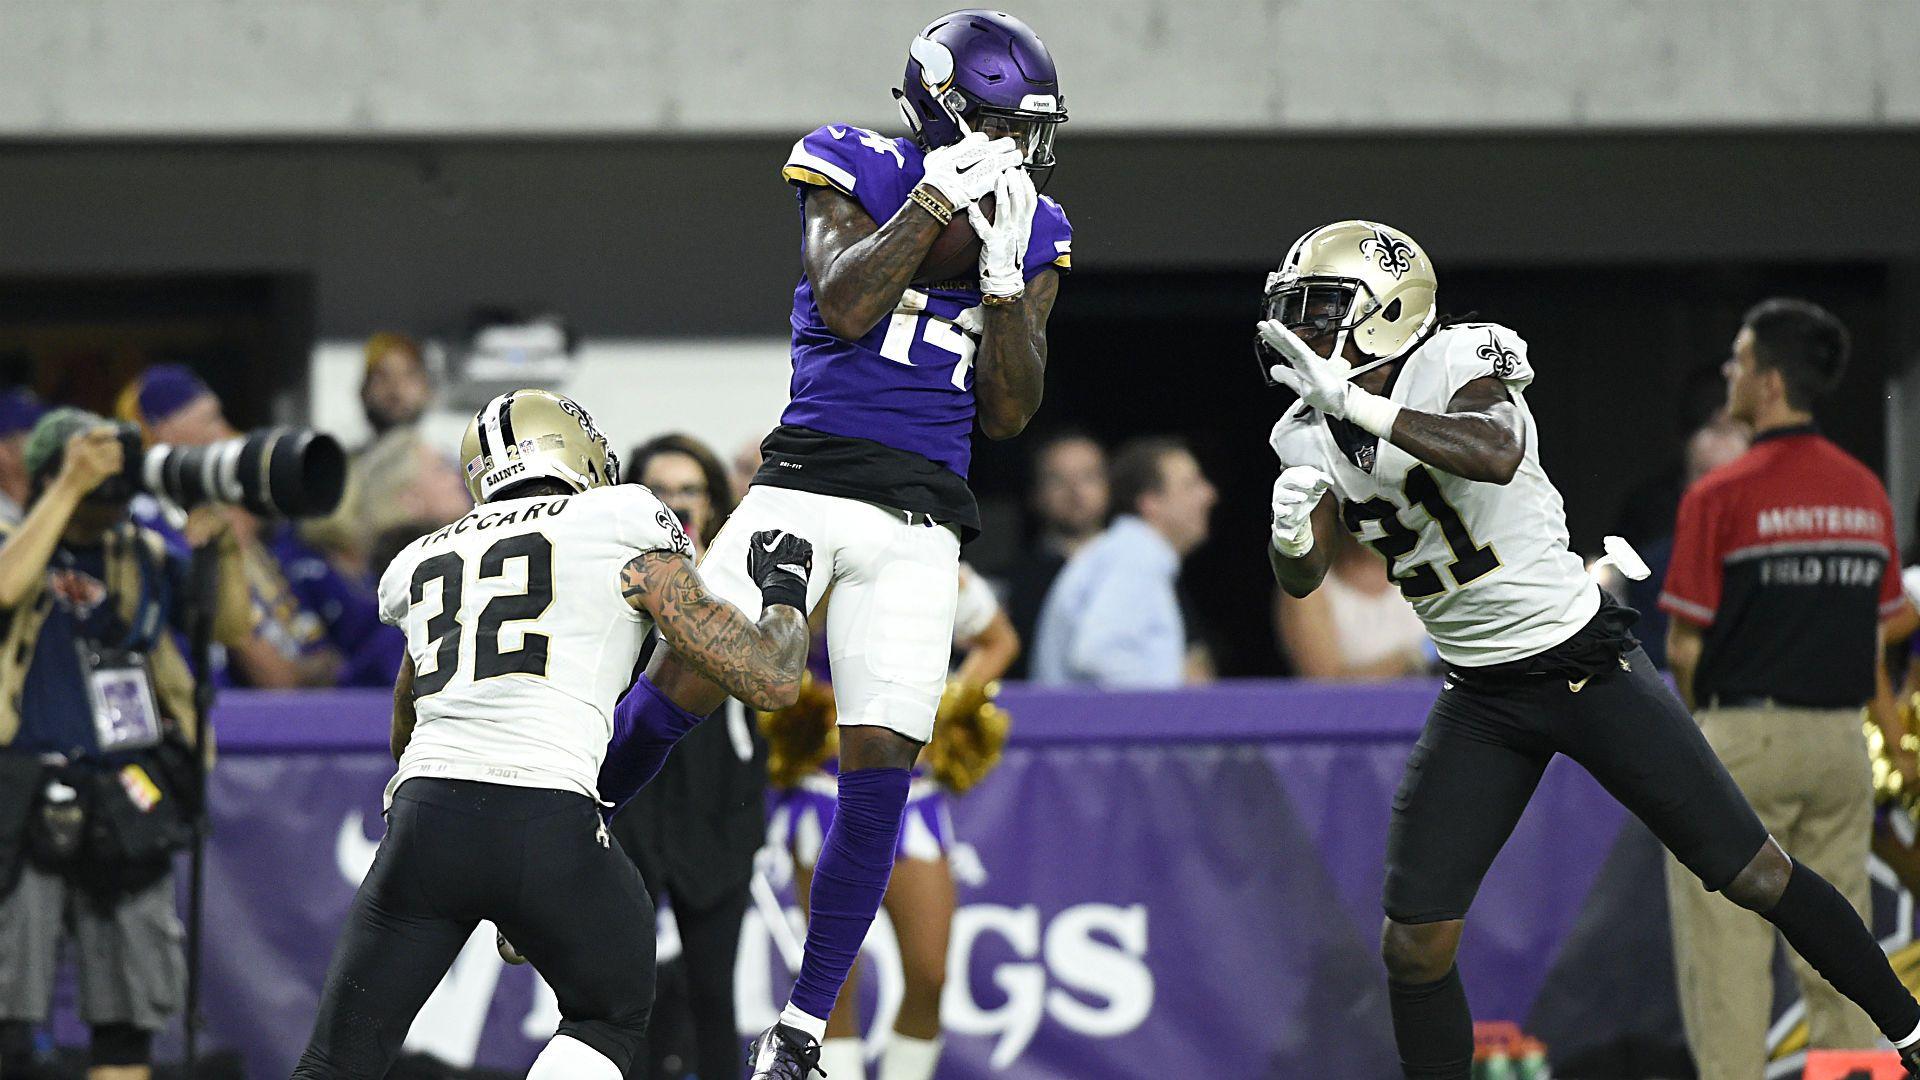 If Vikings start rolling in remember the spark Stefon Diggs